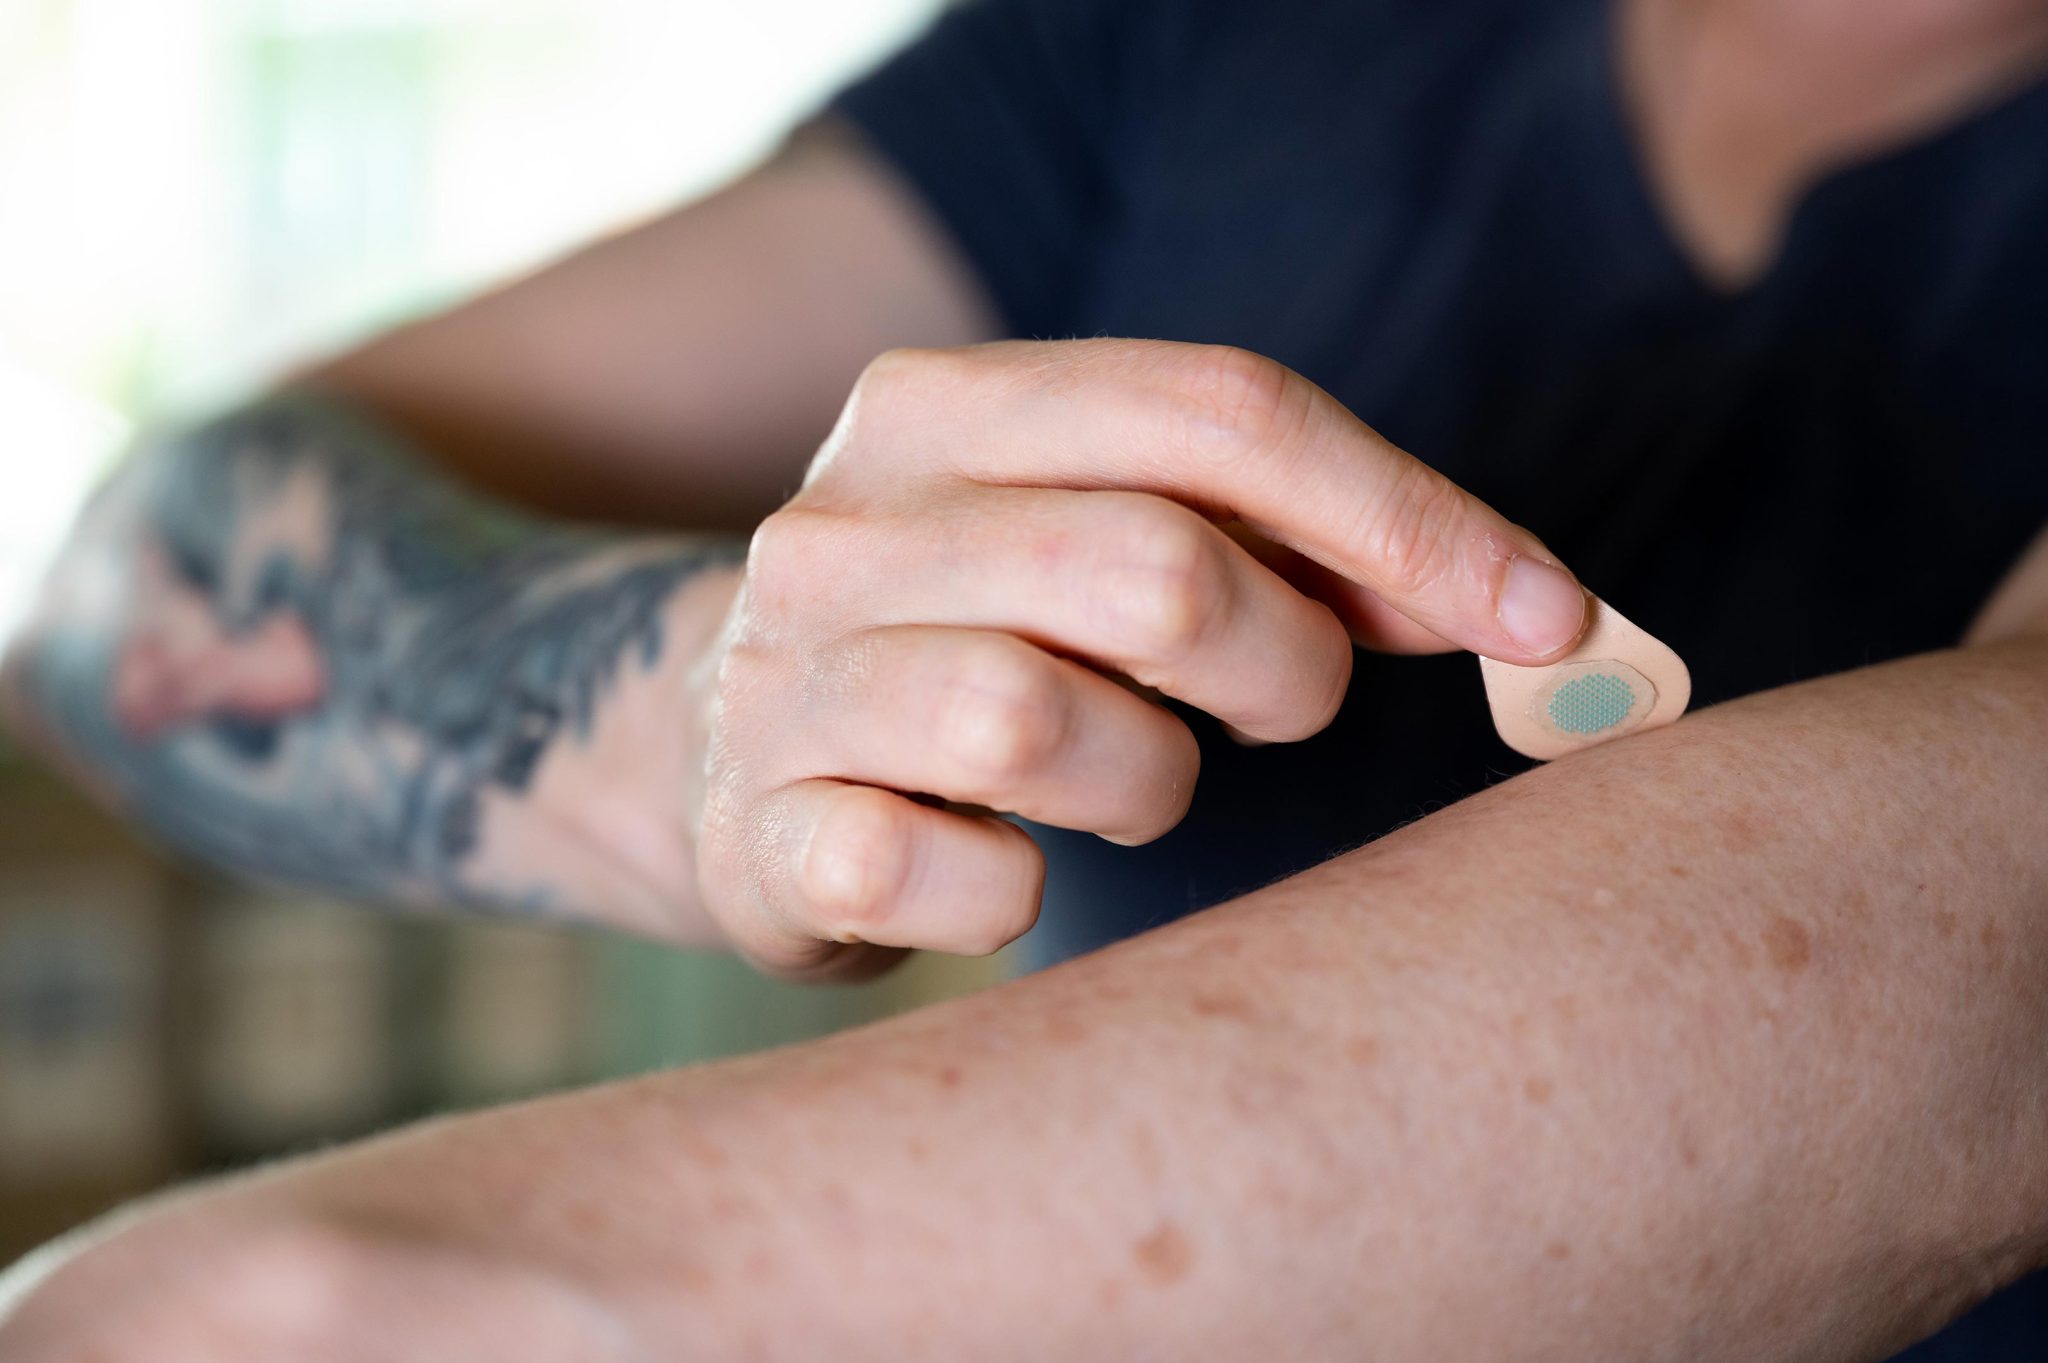 Microneedle Patch Tattoo Being Applied